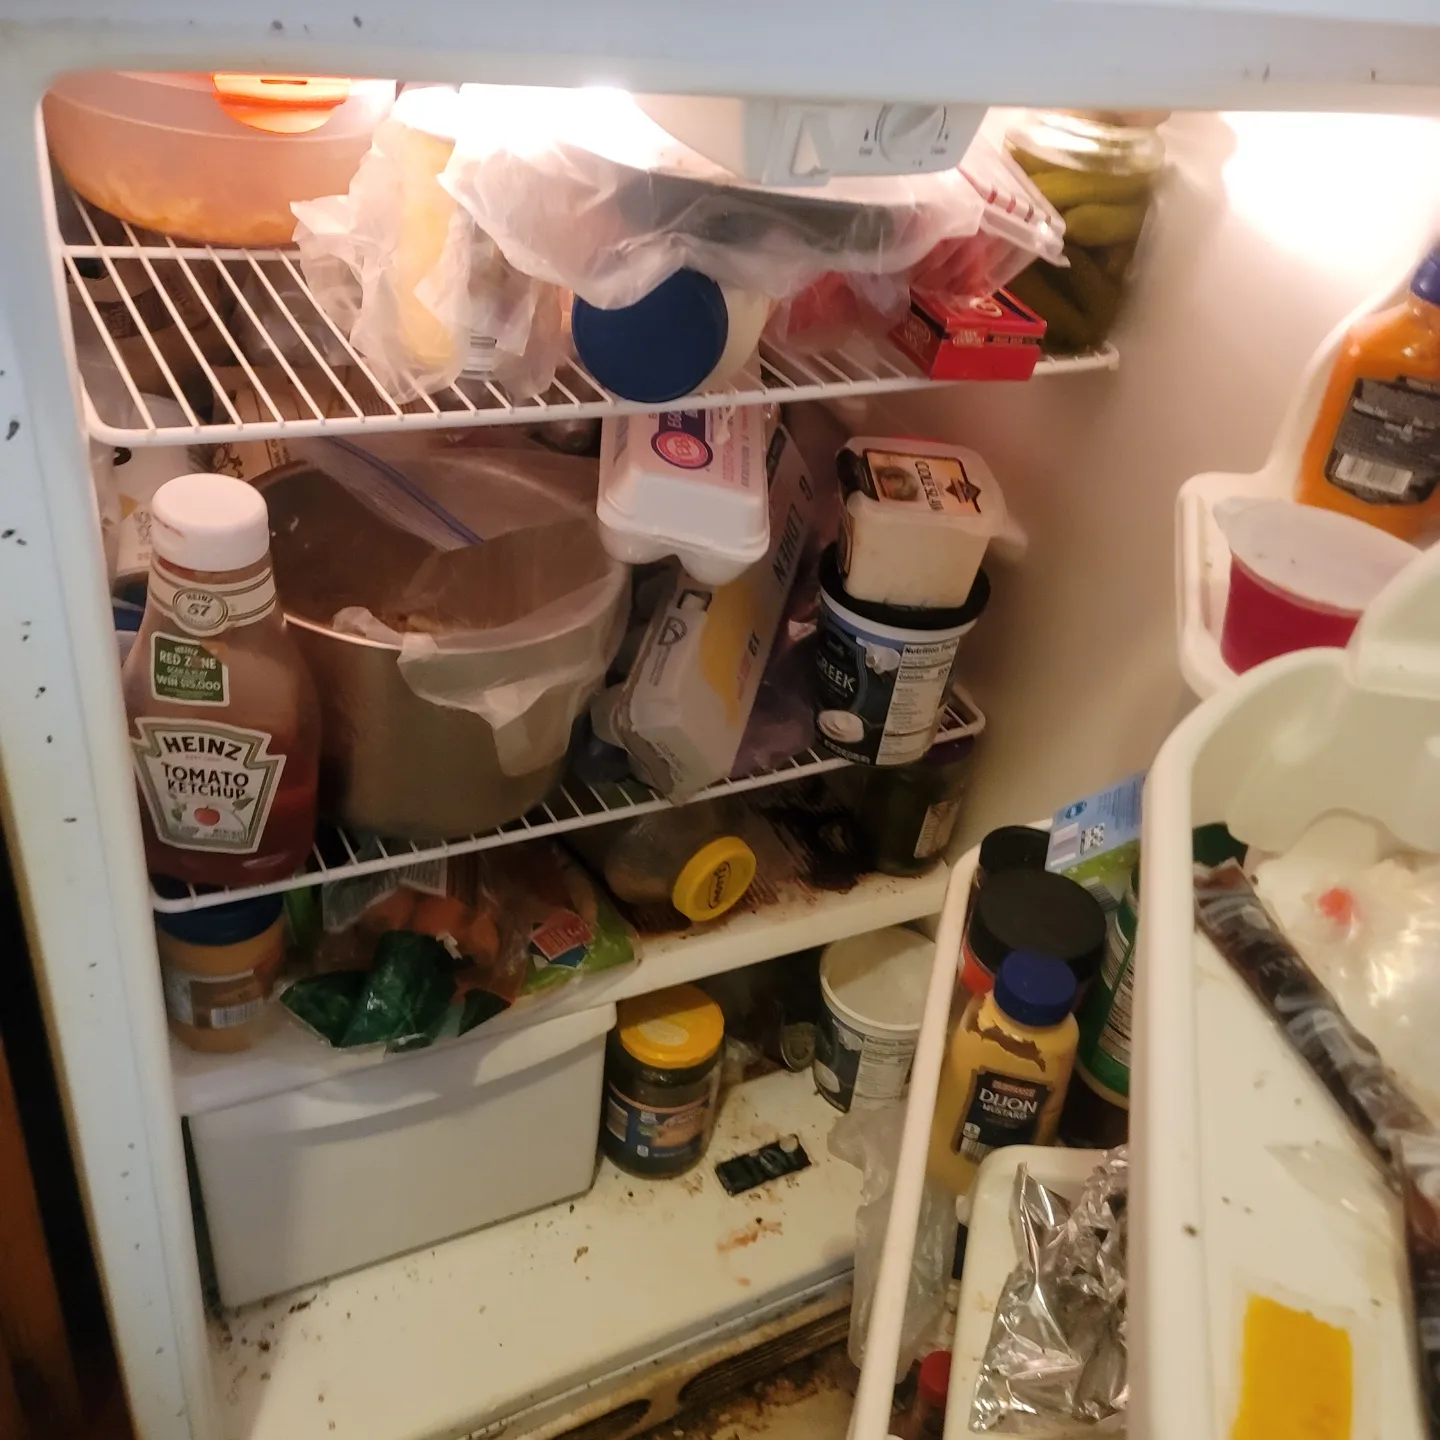 An untidy fridge with used food items